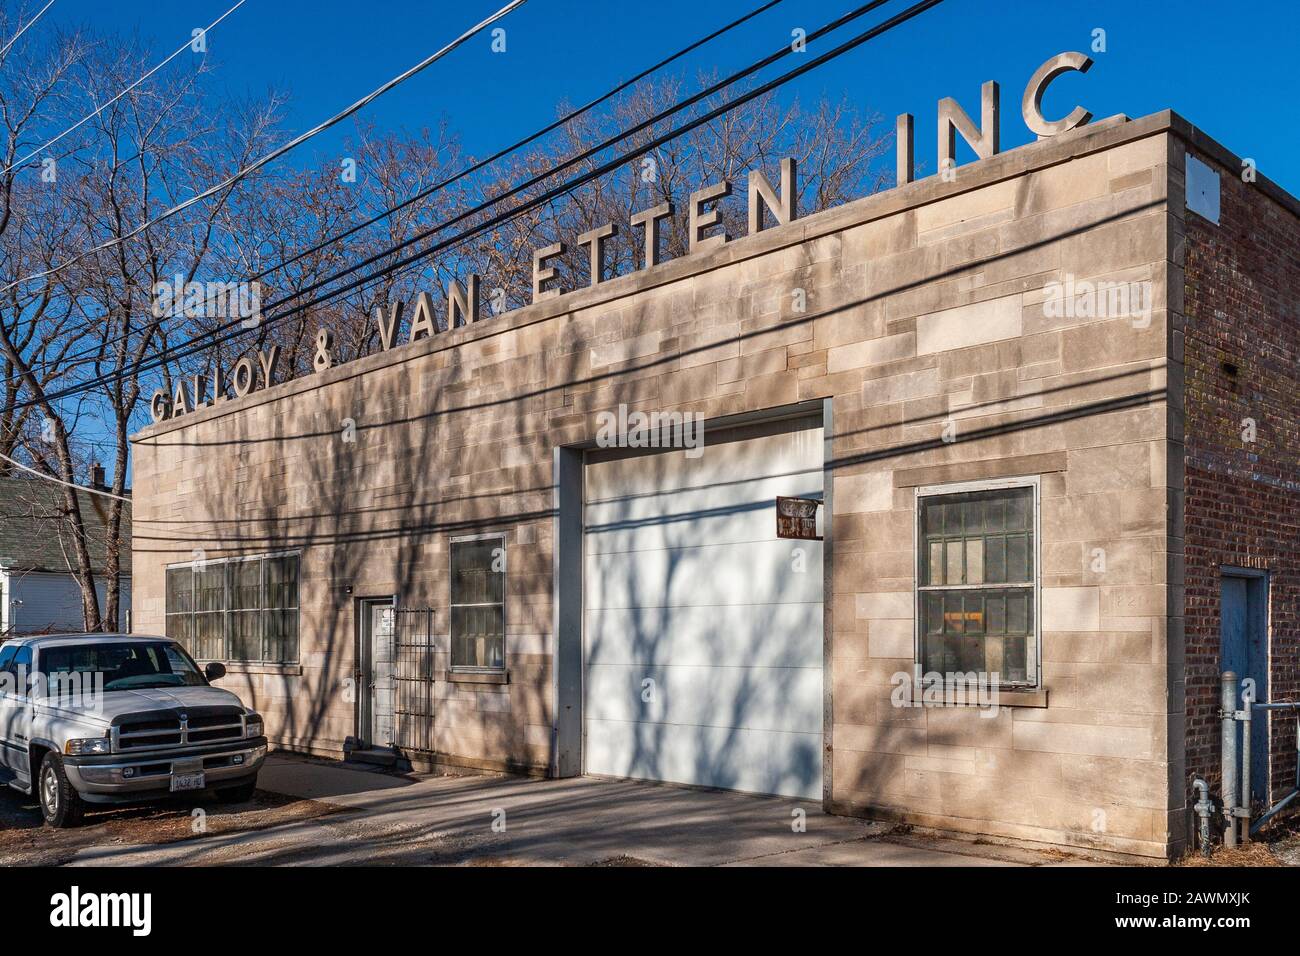 Galloy & Van Etten stone supply company on the south side Stock Photo